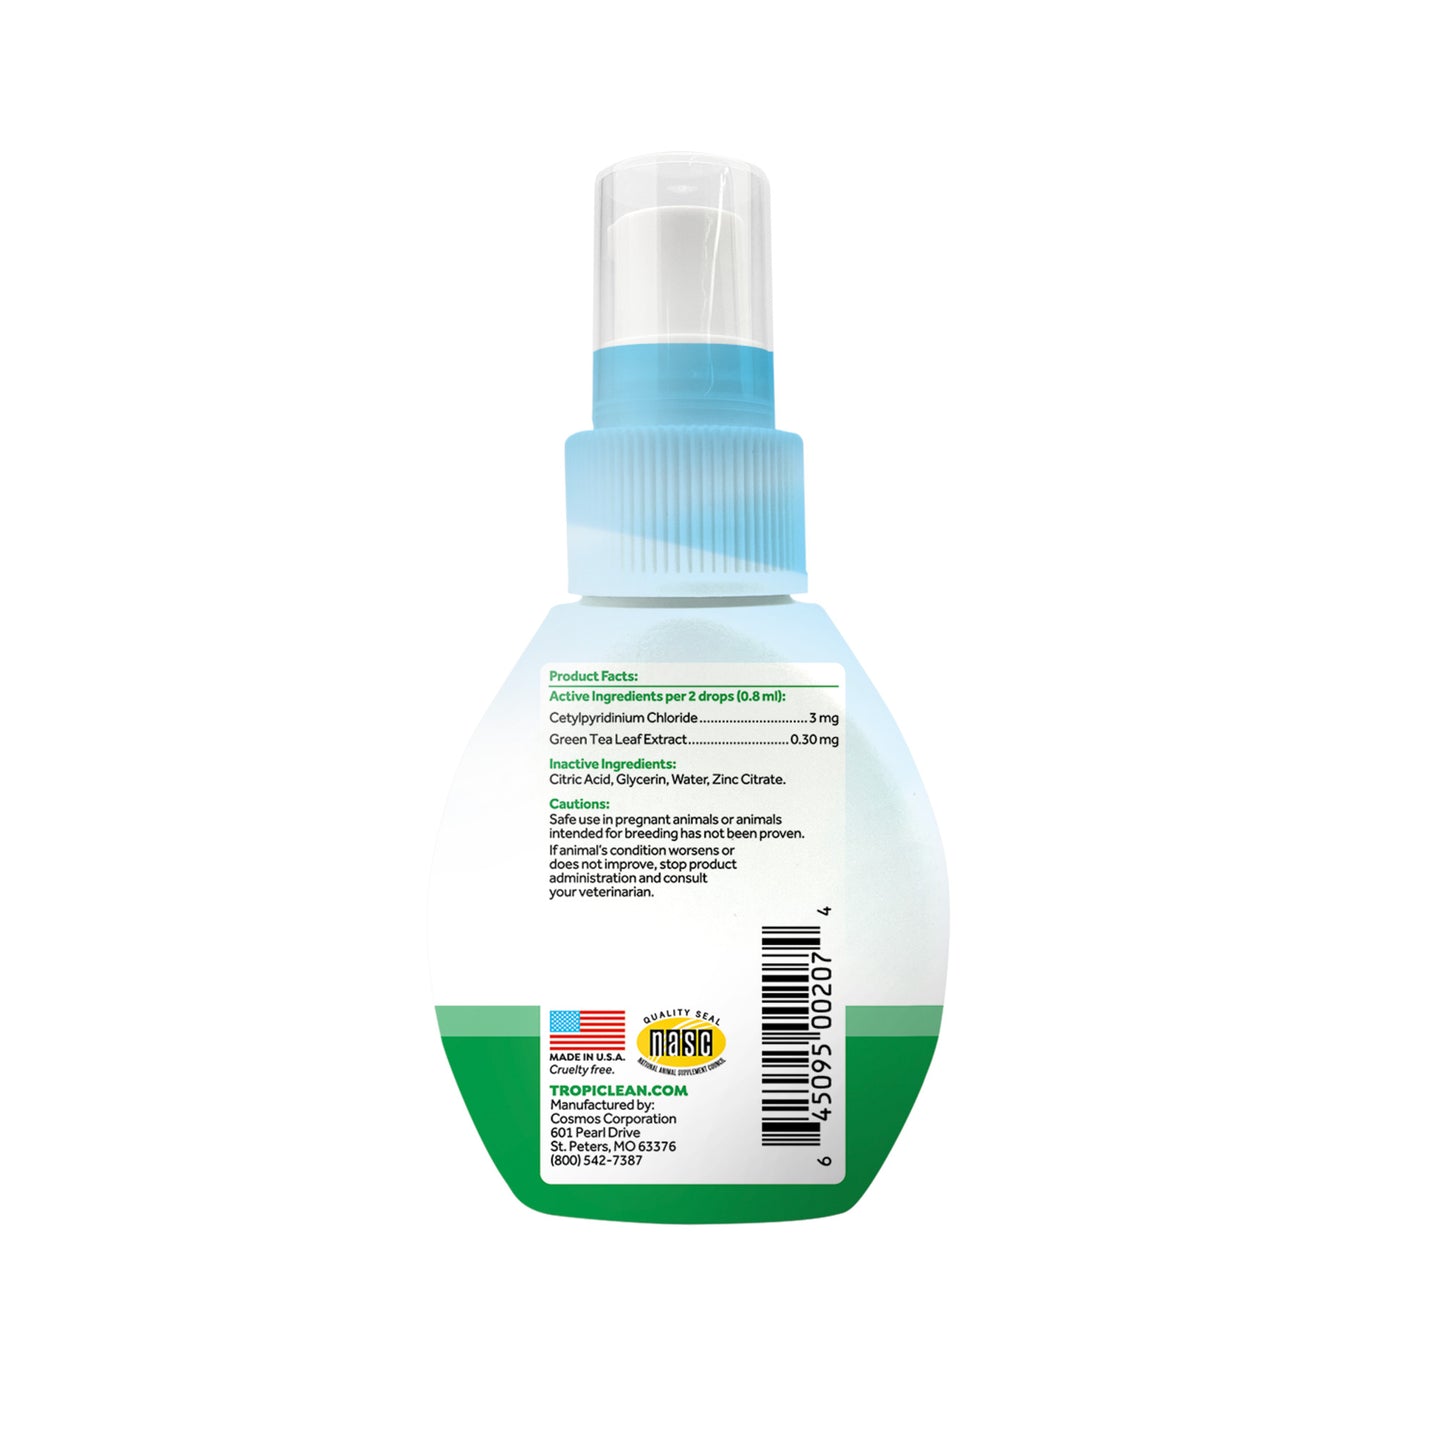 TropiClean Fresh Oral Care Drops For Cats